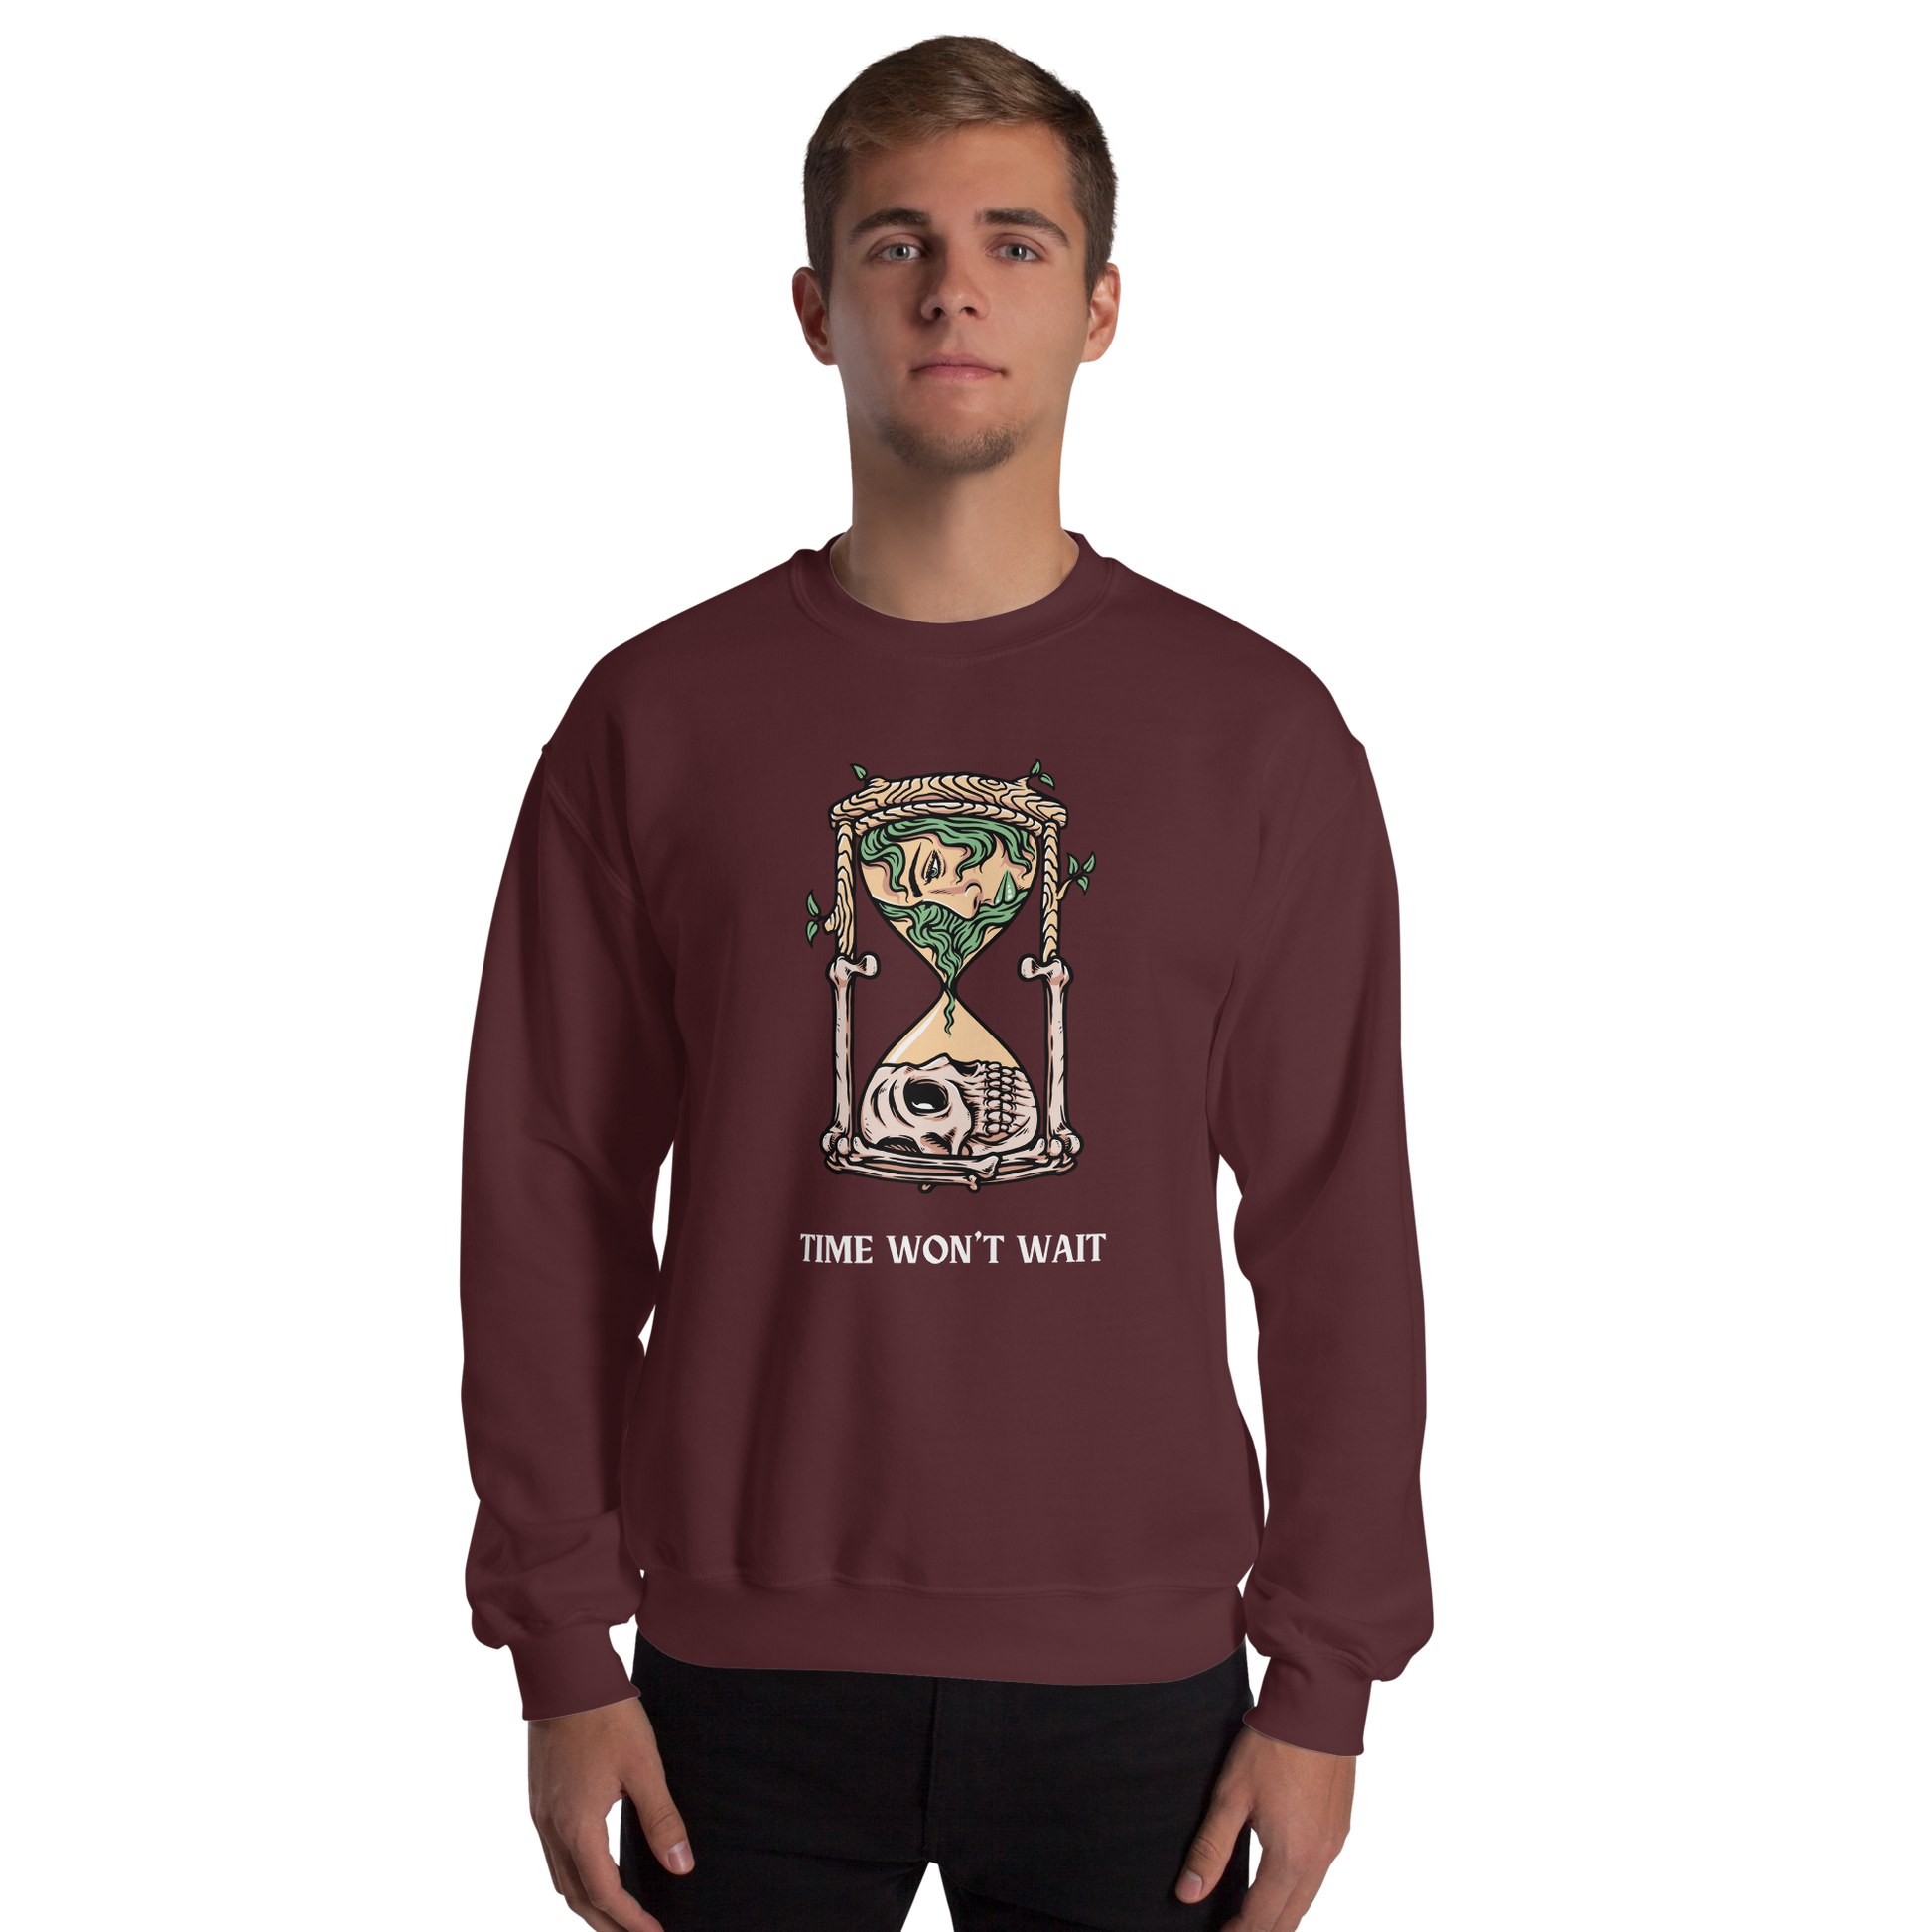 Man wearing a Maroon Hourglass Sweatshirt featuring a captivating Time Won't Wait graphic on the chest - Cool Graphic Hourglass Sweatshirts - Boozy Fox